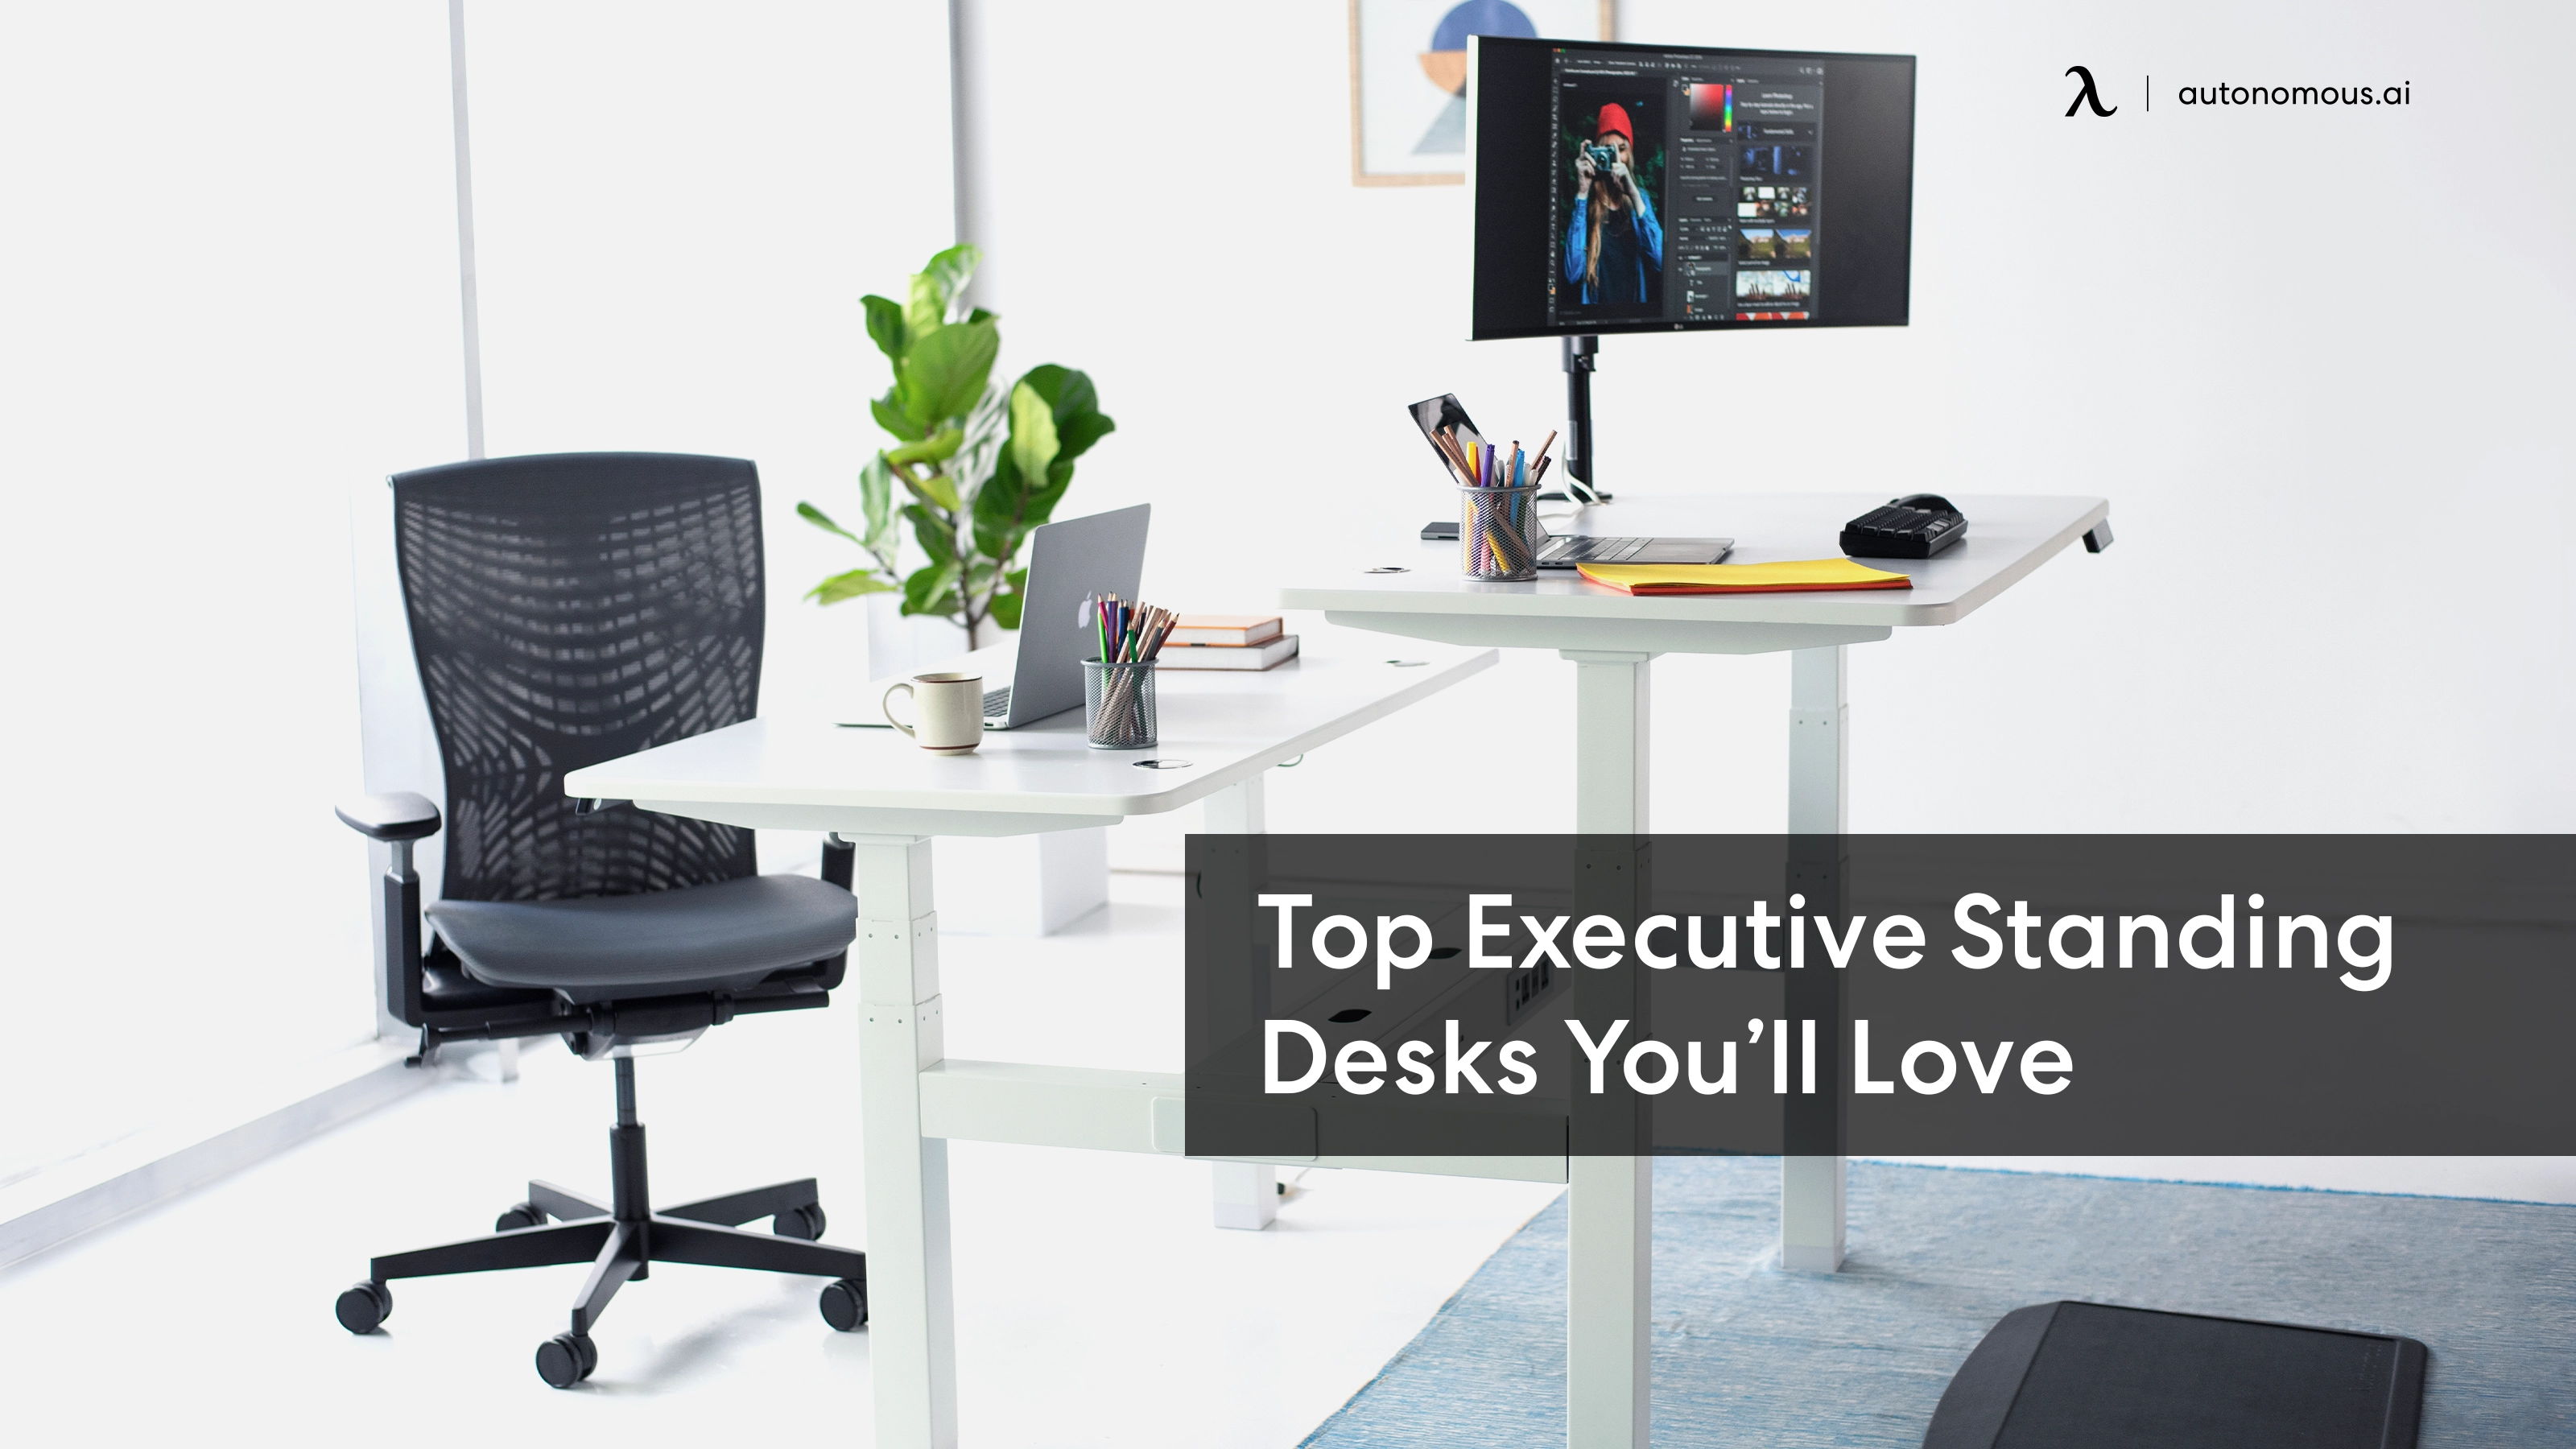 Top 9 Executive Standing Desks to Work More Effectively